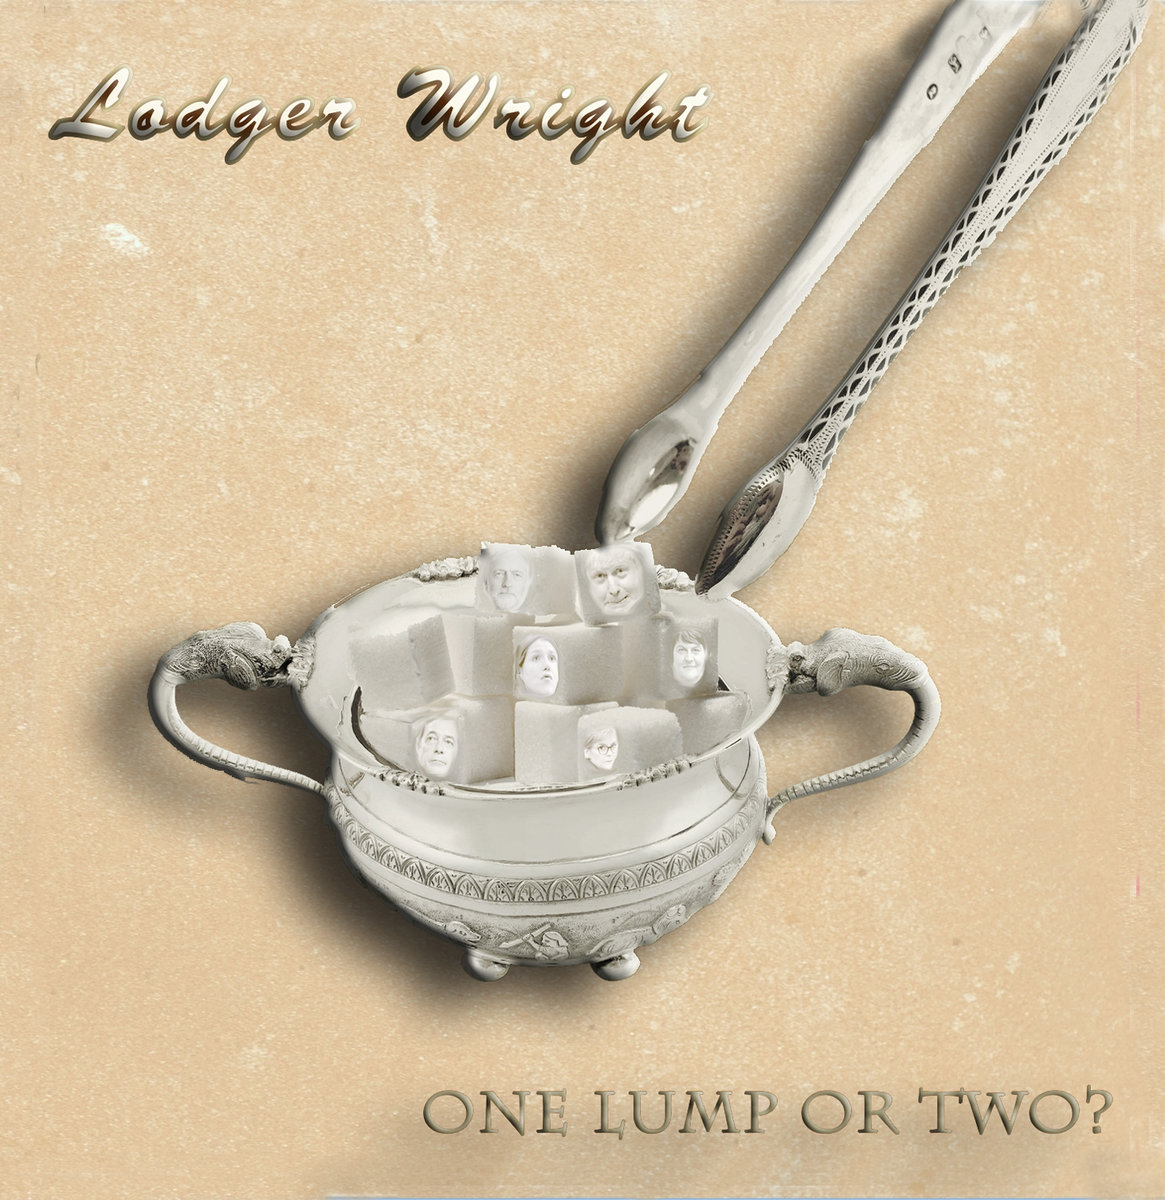 Lodger Wright - One lump or two? (2019) [FLAC 24bit/96kHz]